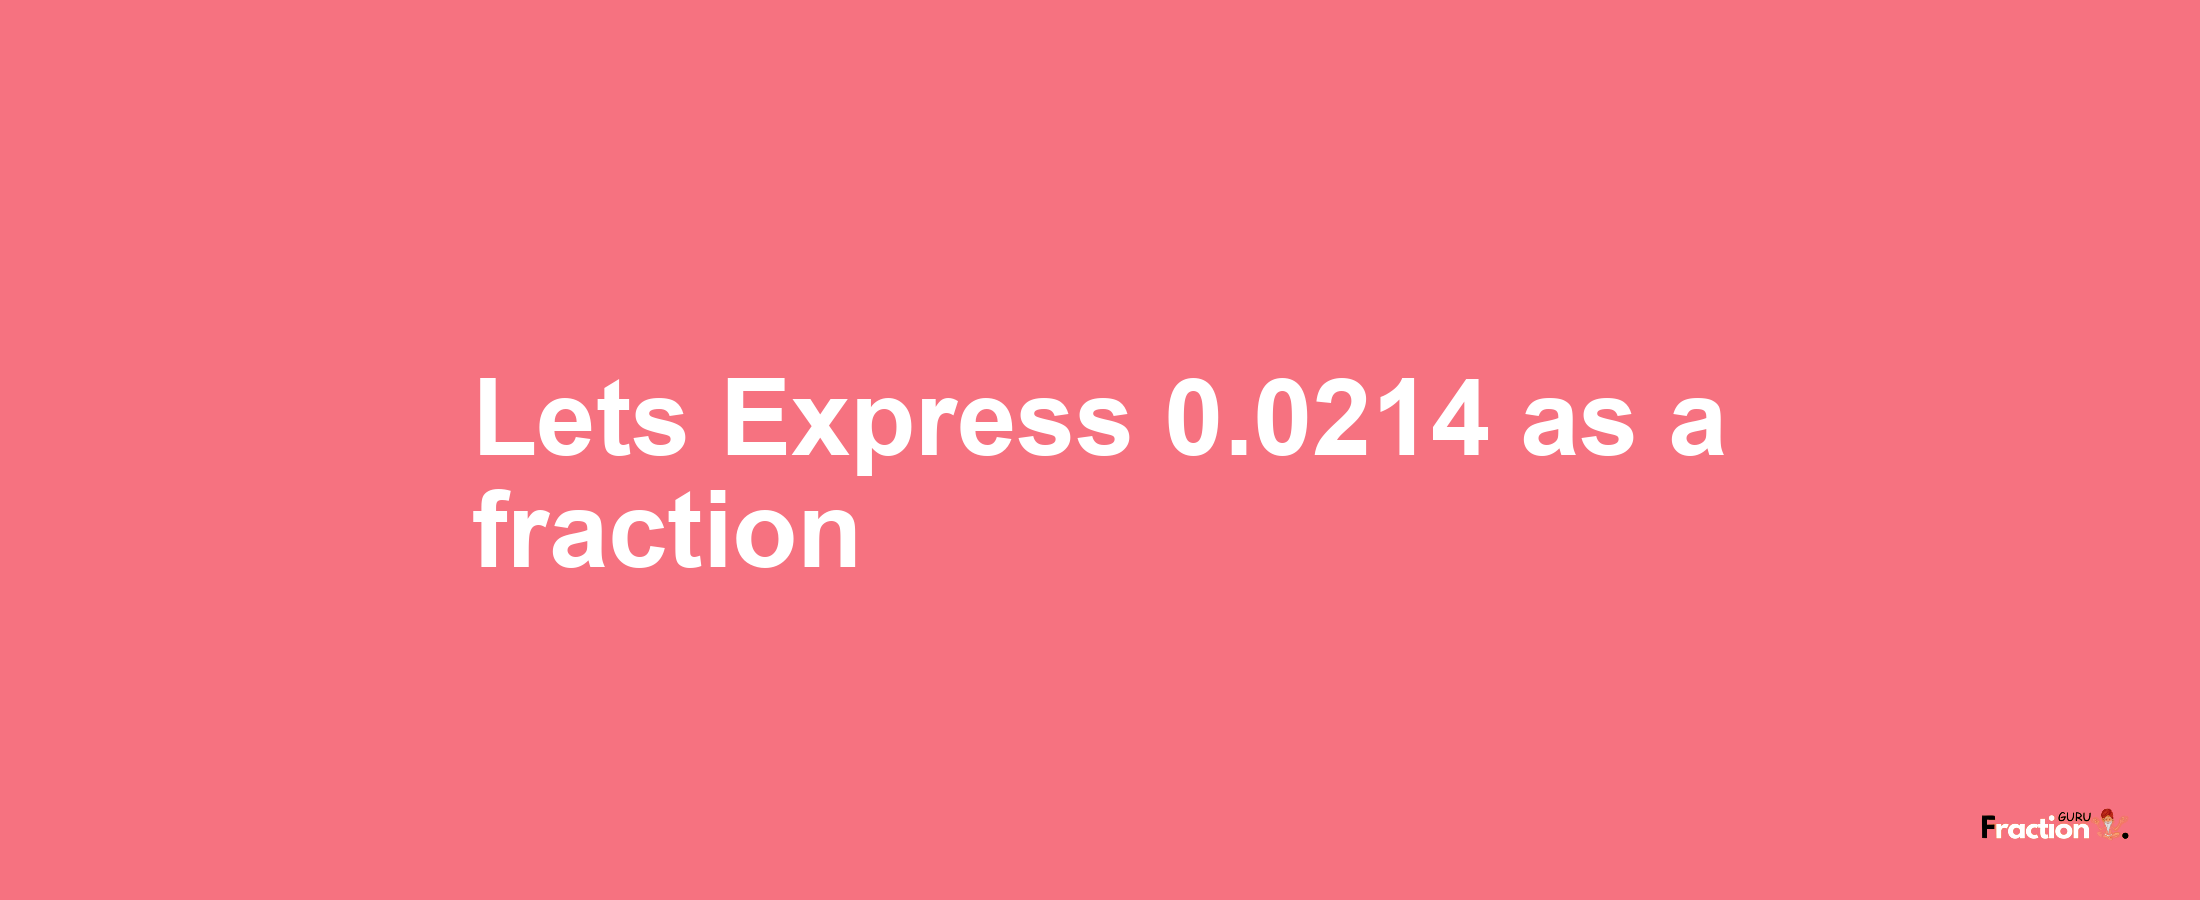 Lets Express 0.0214 as afraction